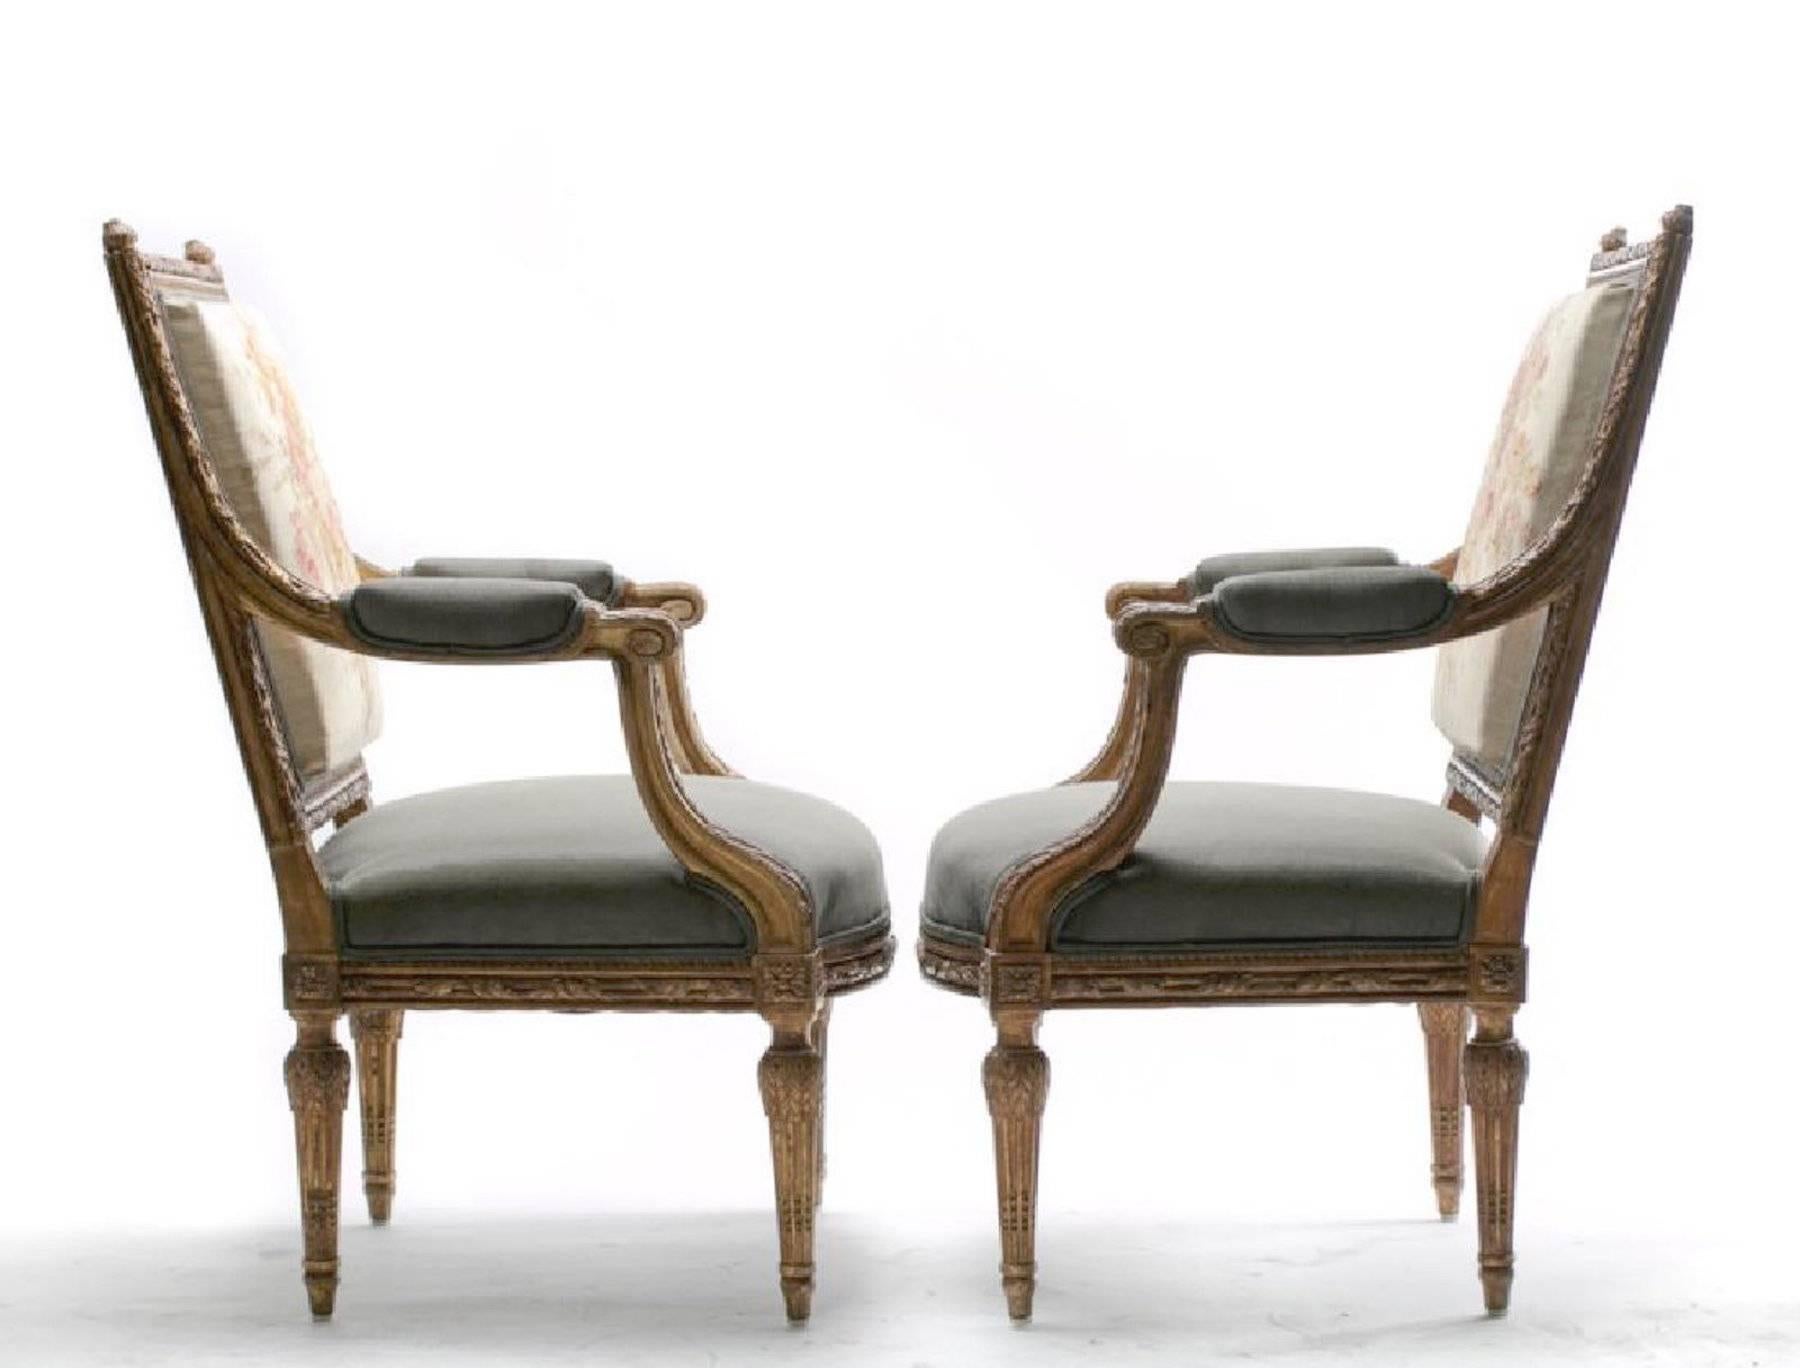 Hand-Woven 19th Century Louis XVI Style Aubusson Chairs, a Pair